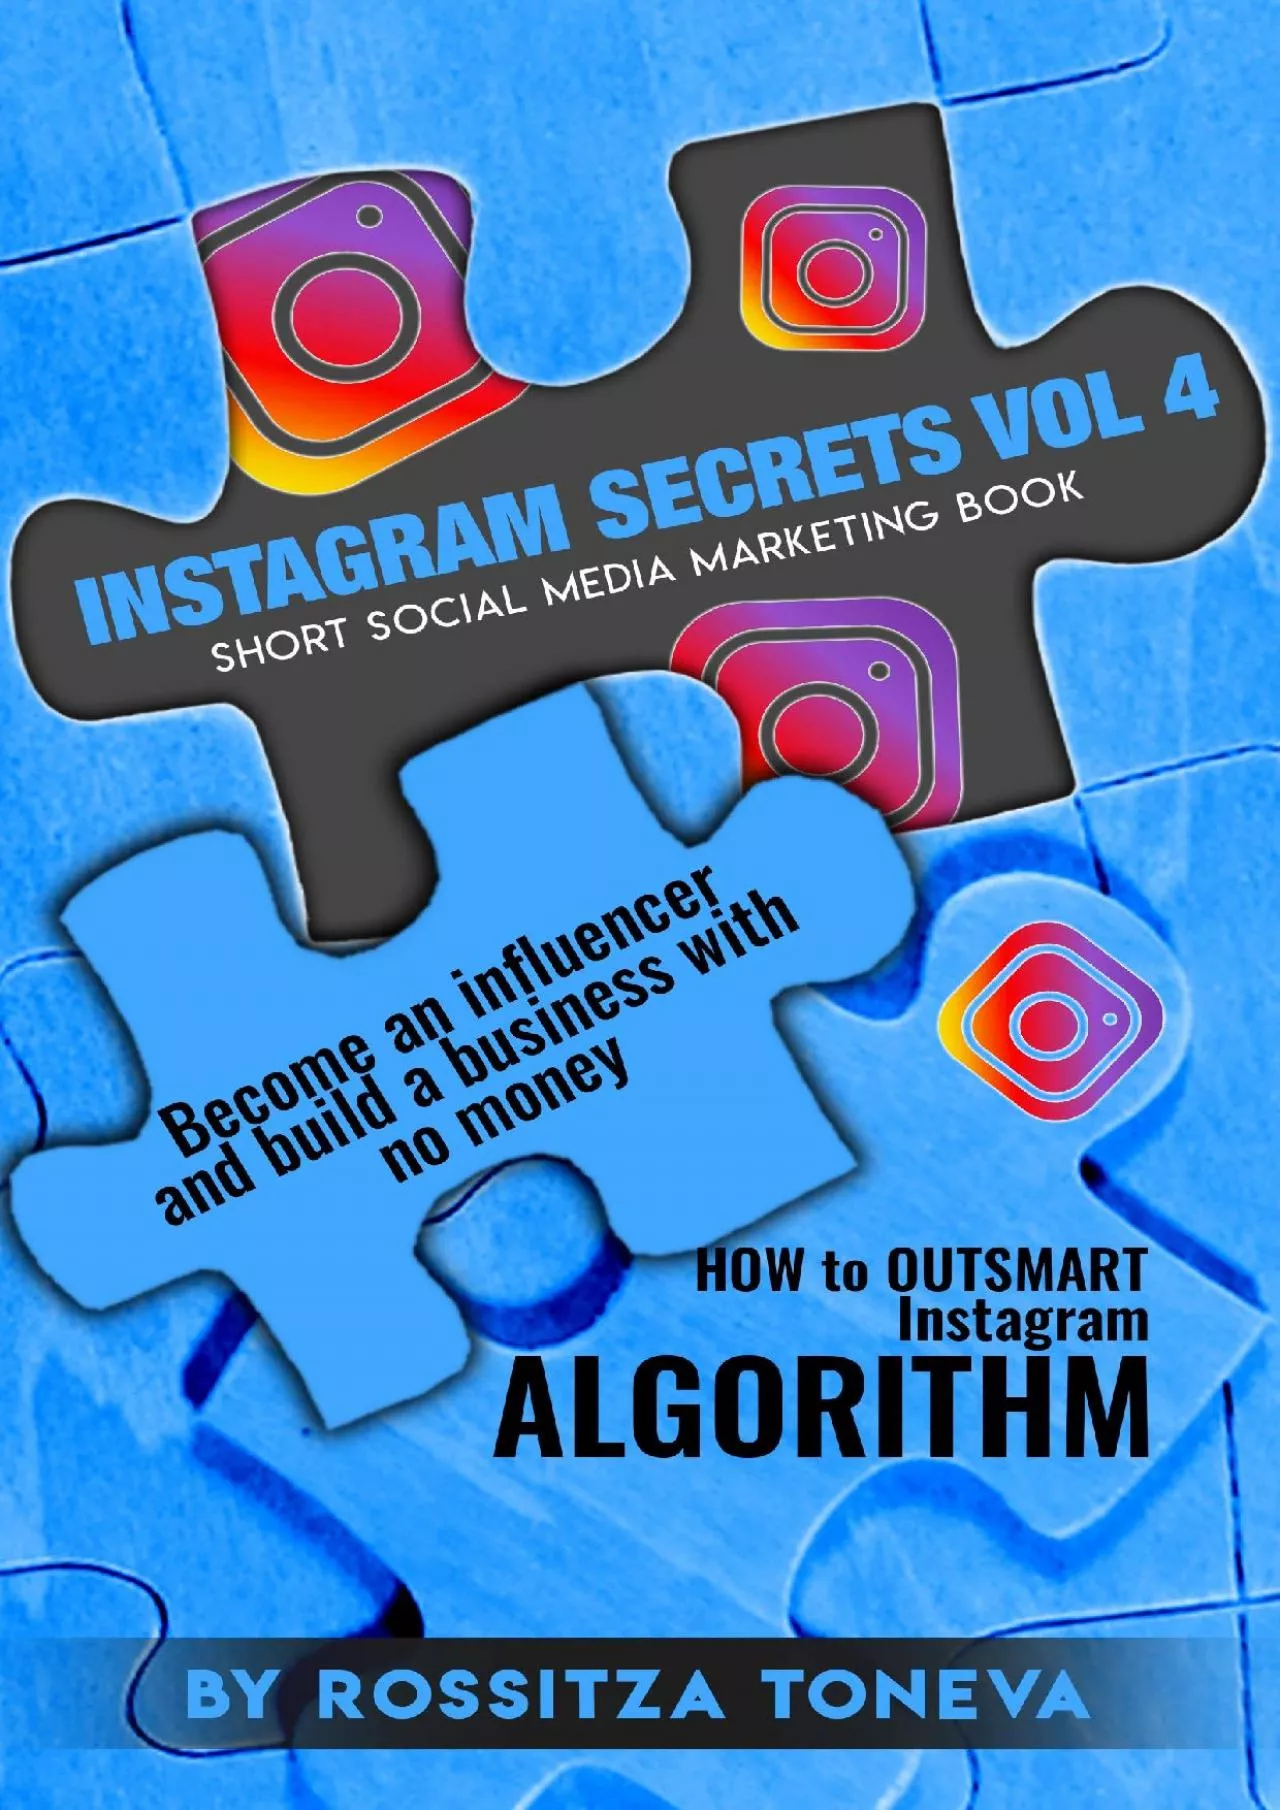 INSTAGRAM SECRETS (Vol.4) : How to Outsmart Instagram ALGORITHM.Become an Influencer and